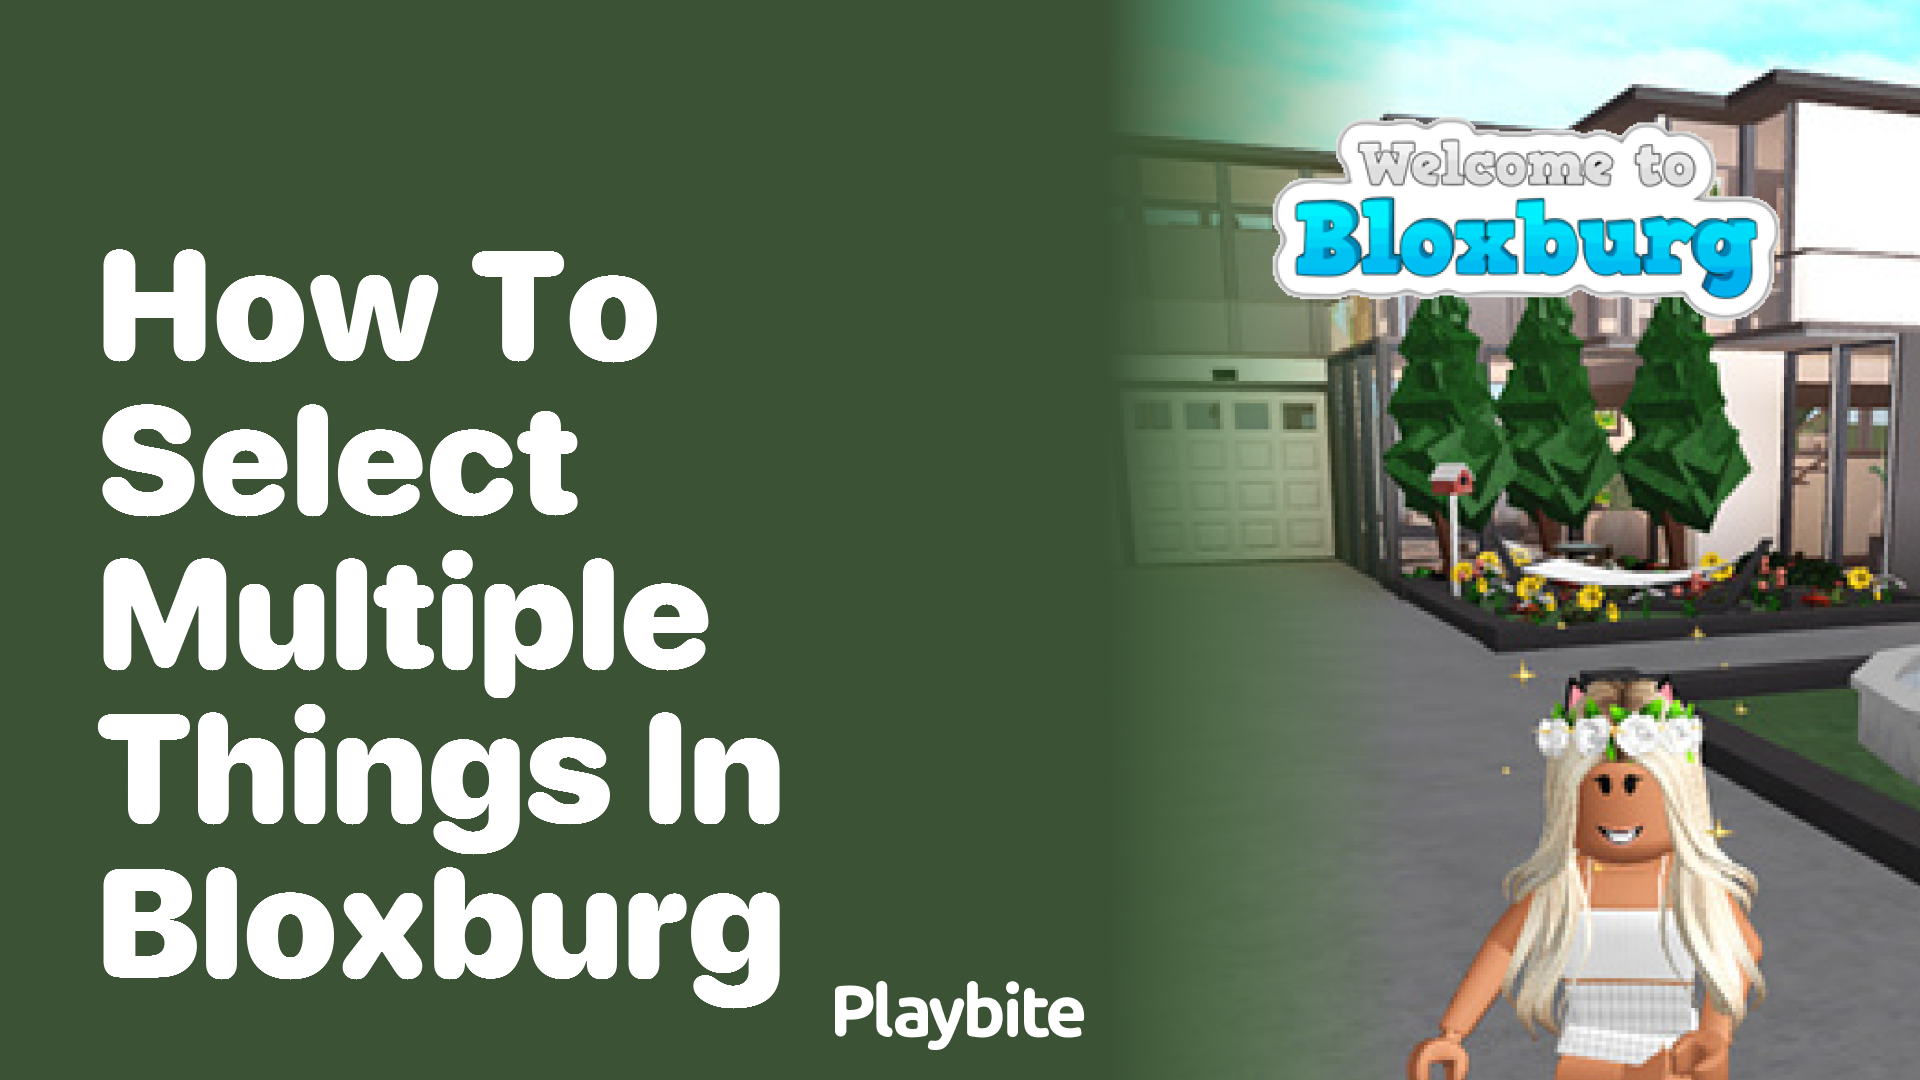 How to Select Multiple Things in Bloxburg